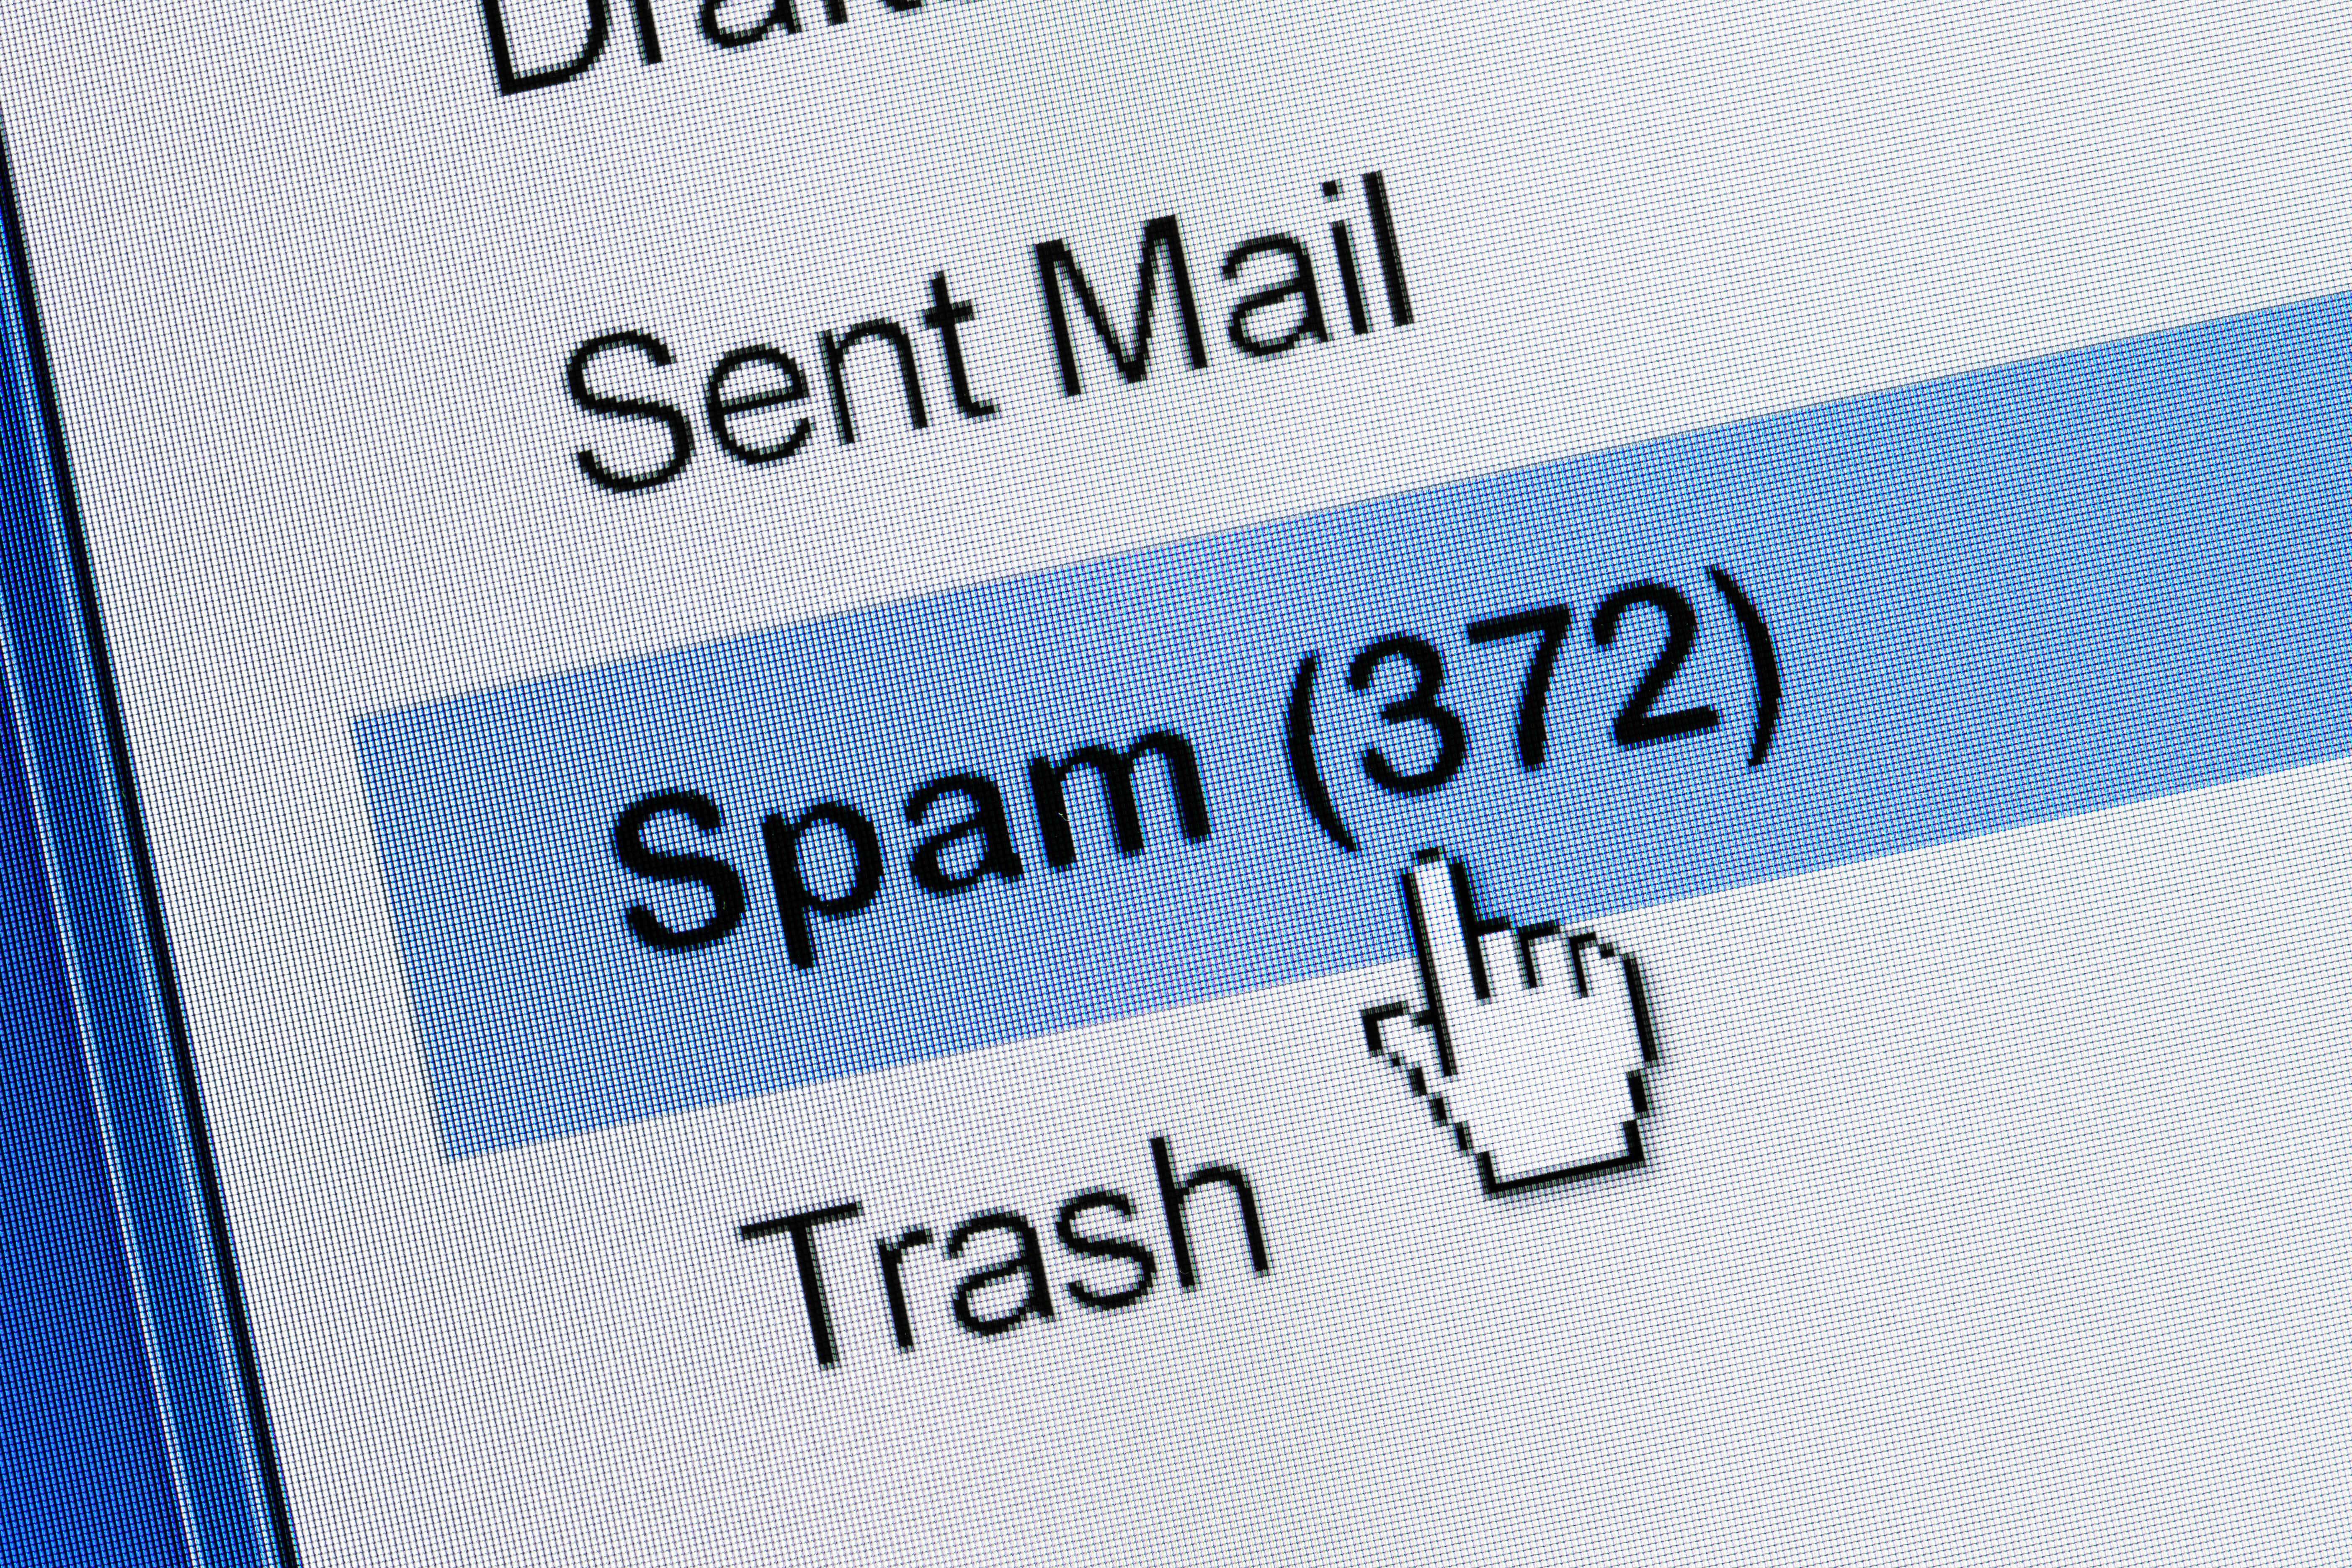 New Spam Filters and Controls for Private Email Accounts